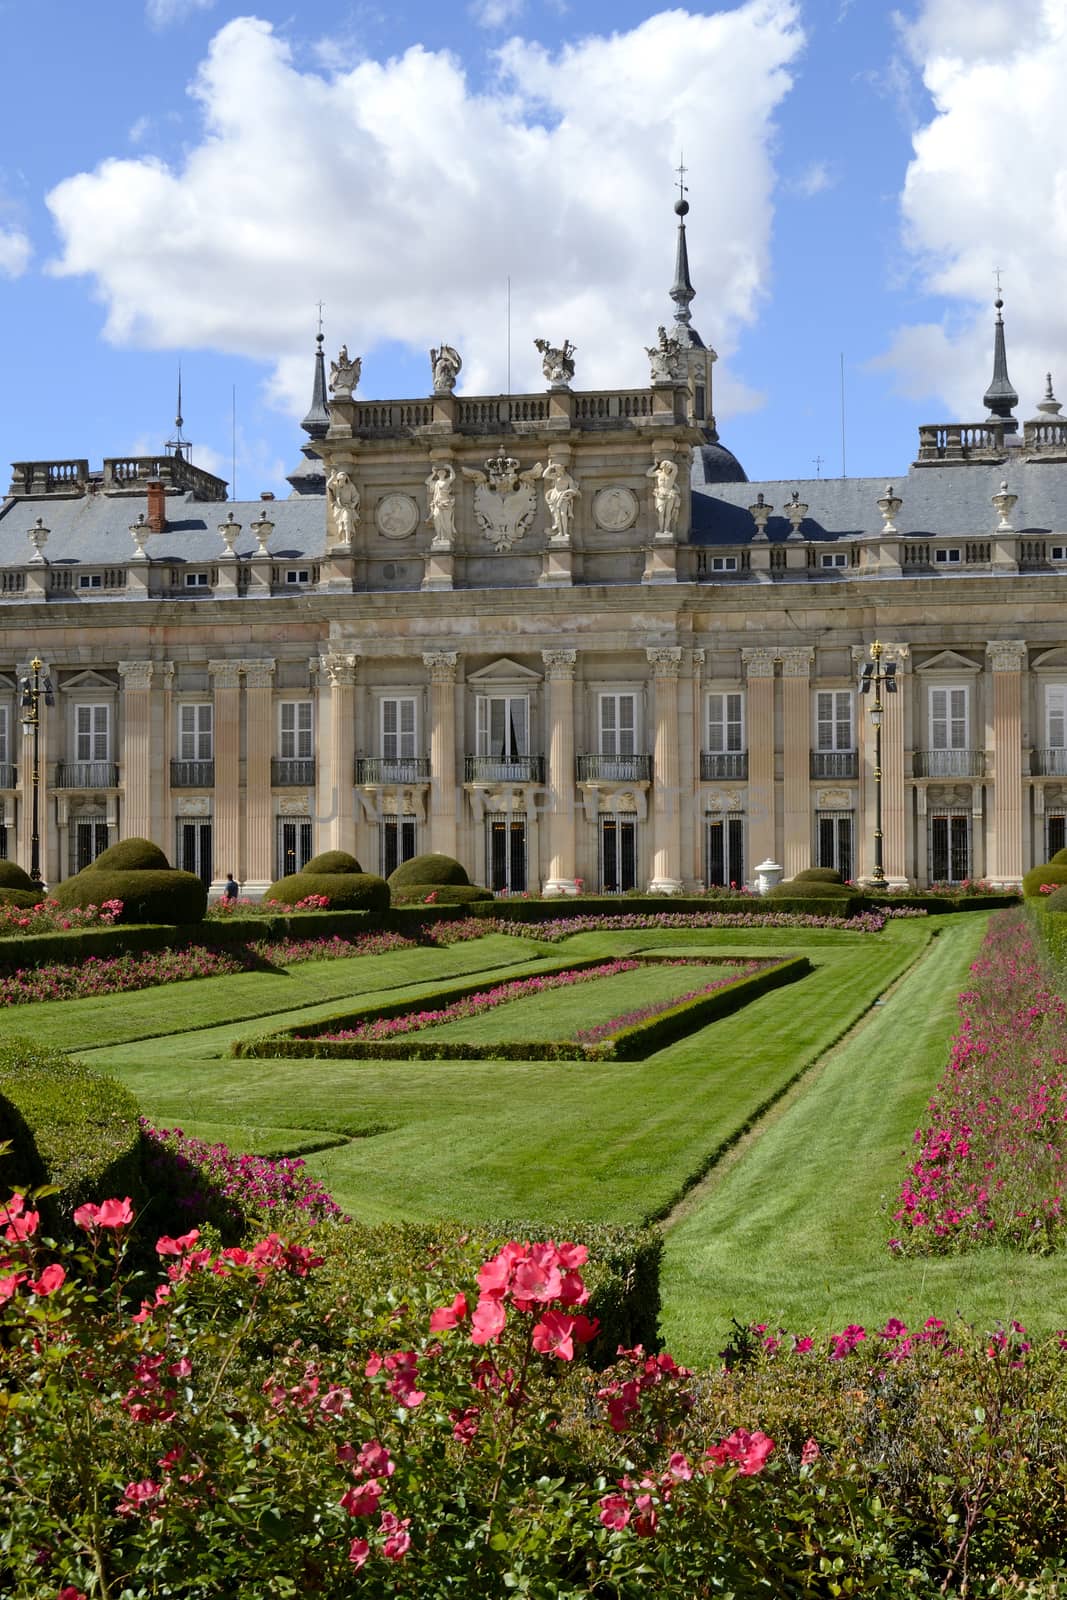 Palace, garden and flowers in foreground by ncuisinier